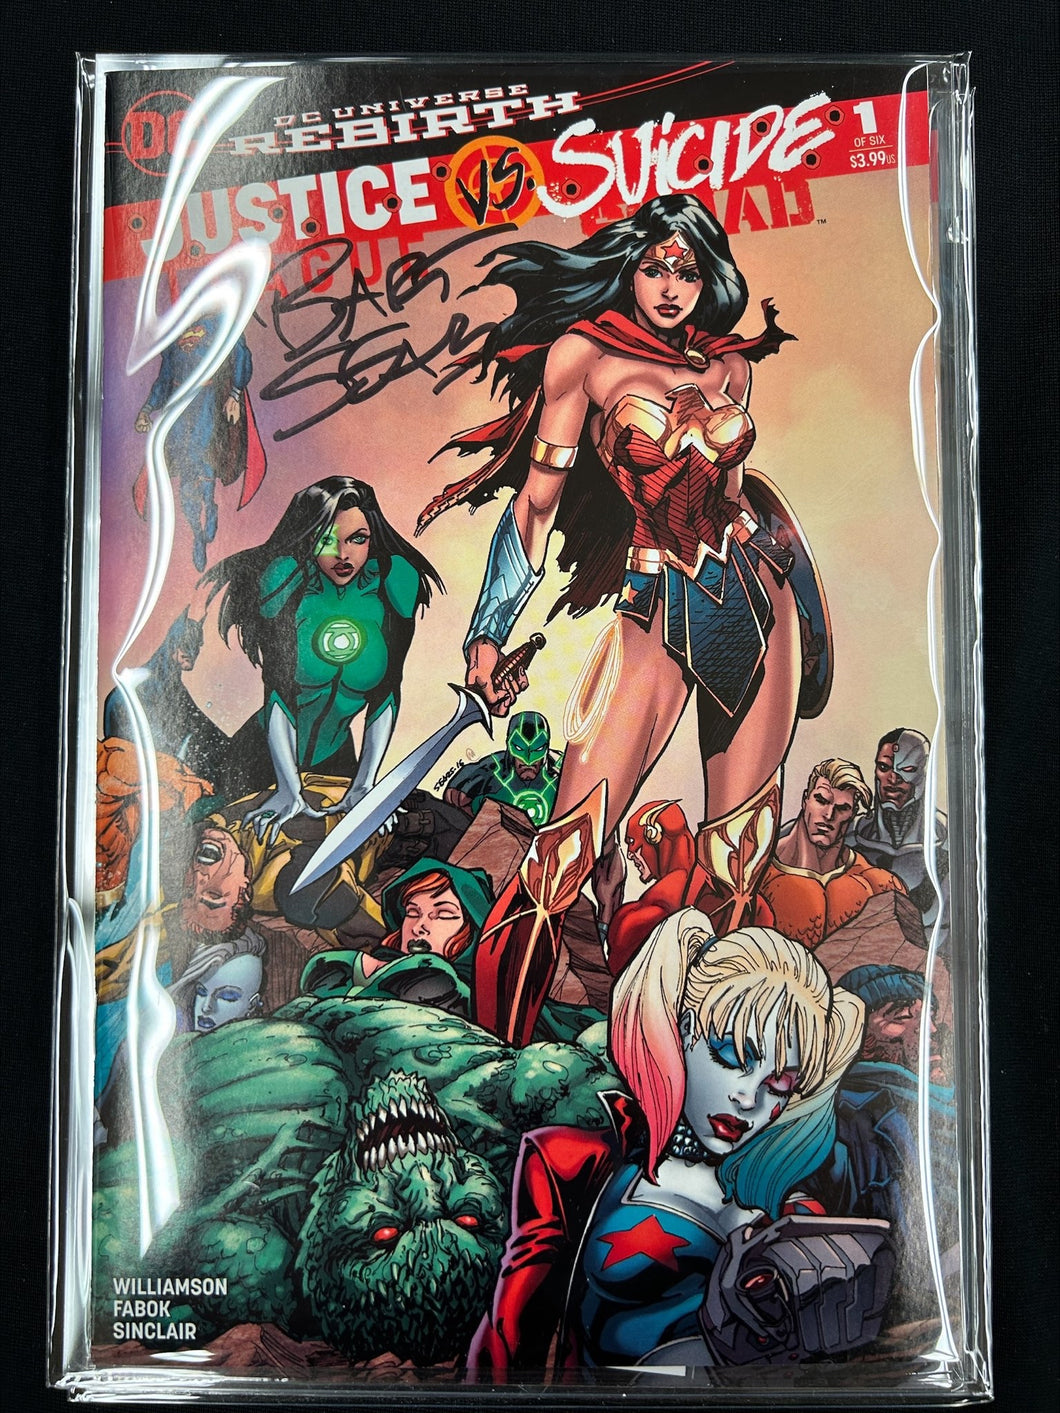 Justice League vs. Suicide Squad #1 Diana Victorious (Cover C) Signed by BART SEARS